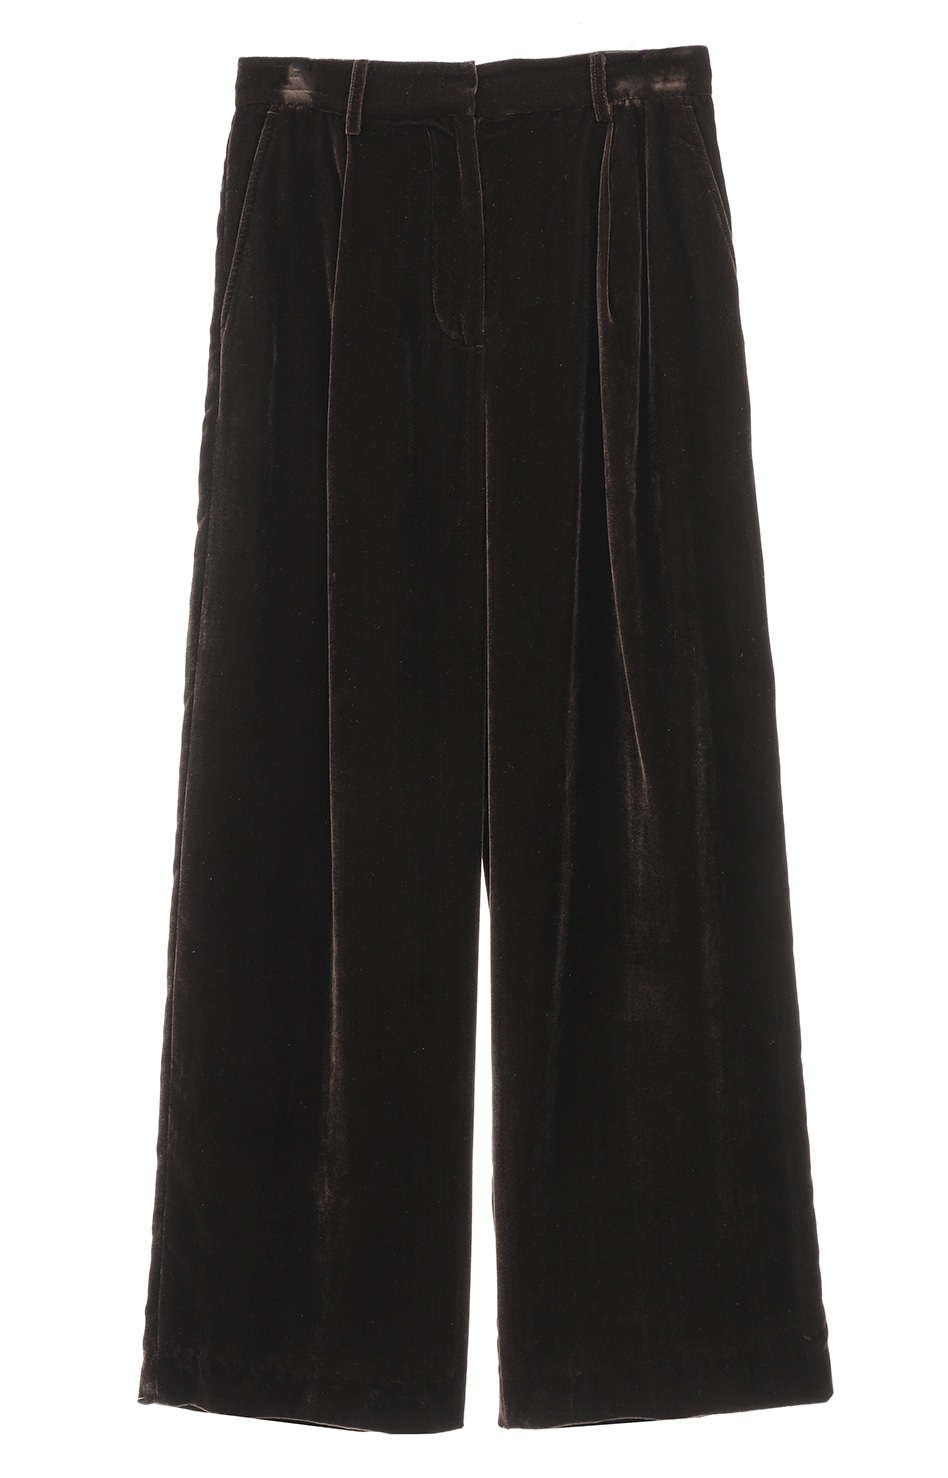 VELOR TUCK WIDE PANTS｜24AW EXHIBITION()｜CLANE OFFICIAL ONLINE STORE